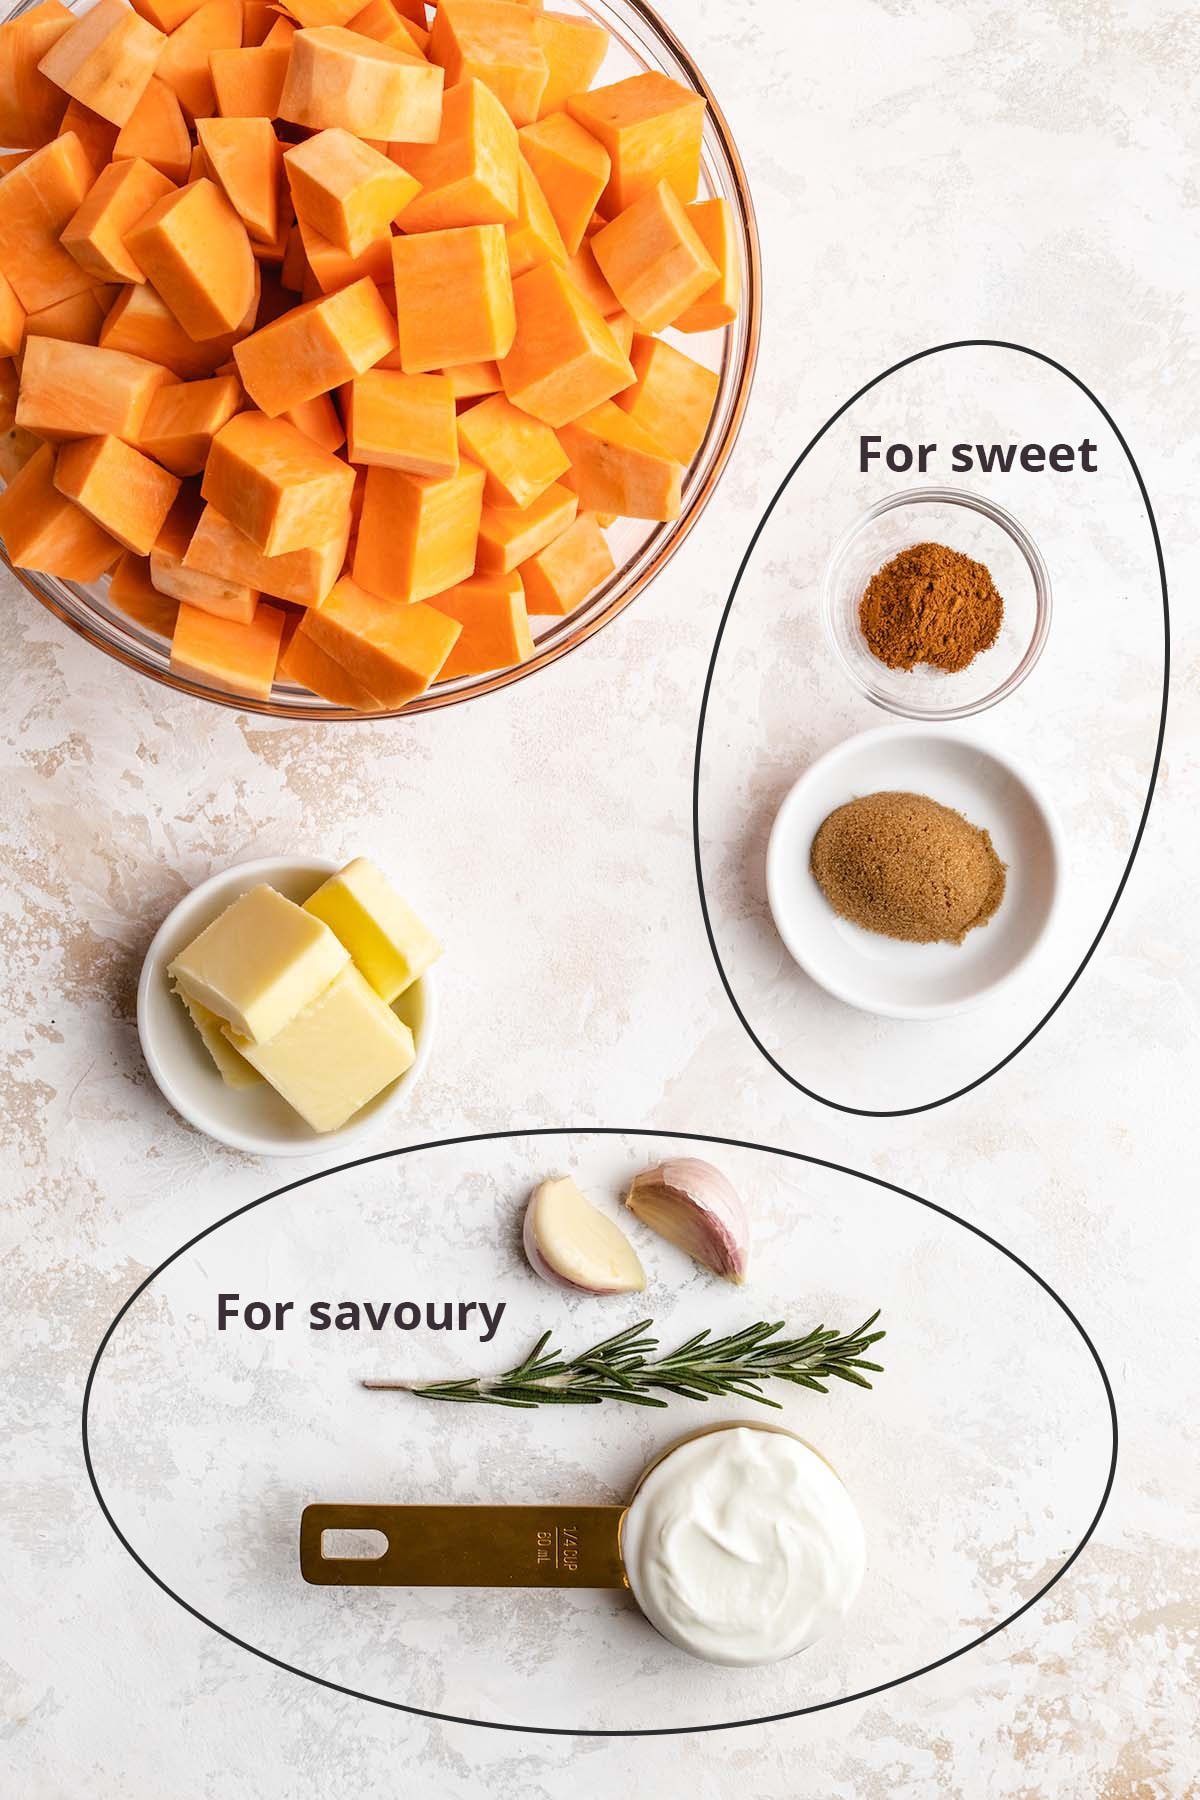 Ingredients needed to make both sweet and savoury flavours of Instant Pot Mashed Sweet Potatoes.